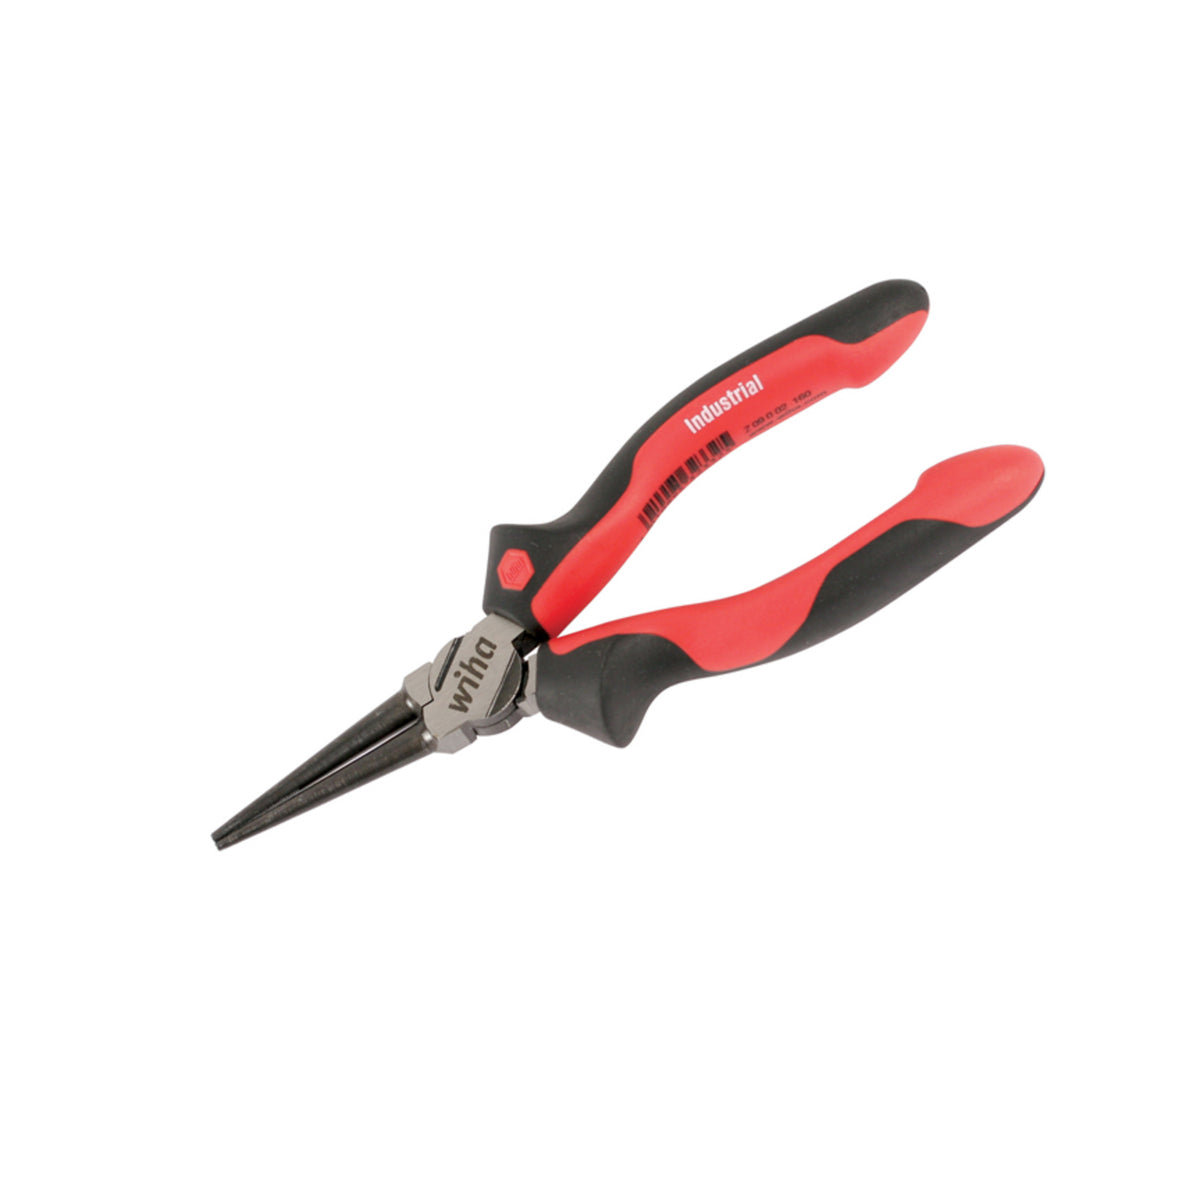 Wiha 30921 Industrial SoftGrip Round Nose Pliers 6.3"